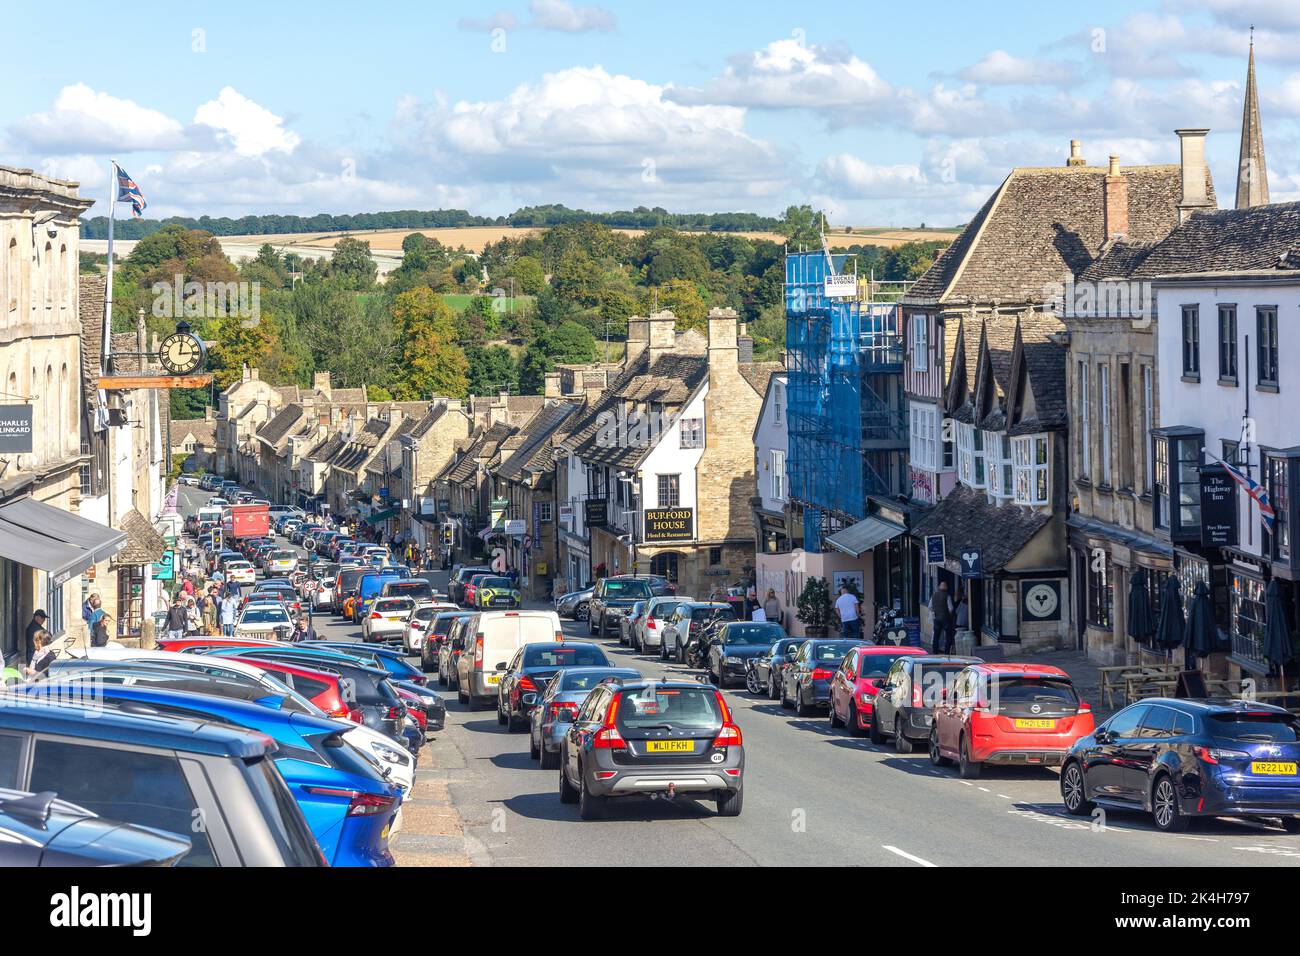 Trafic occupé sur High Street, Burford, Oxfordshire, Angleterre, Royaume-Uni Banque D'Images